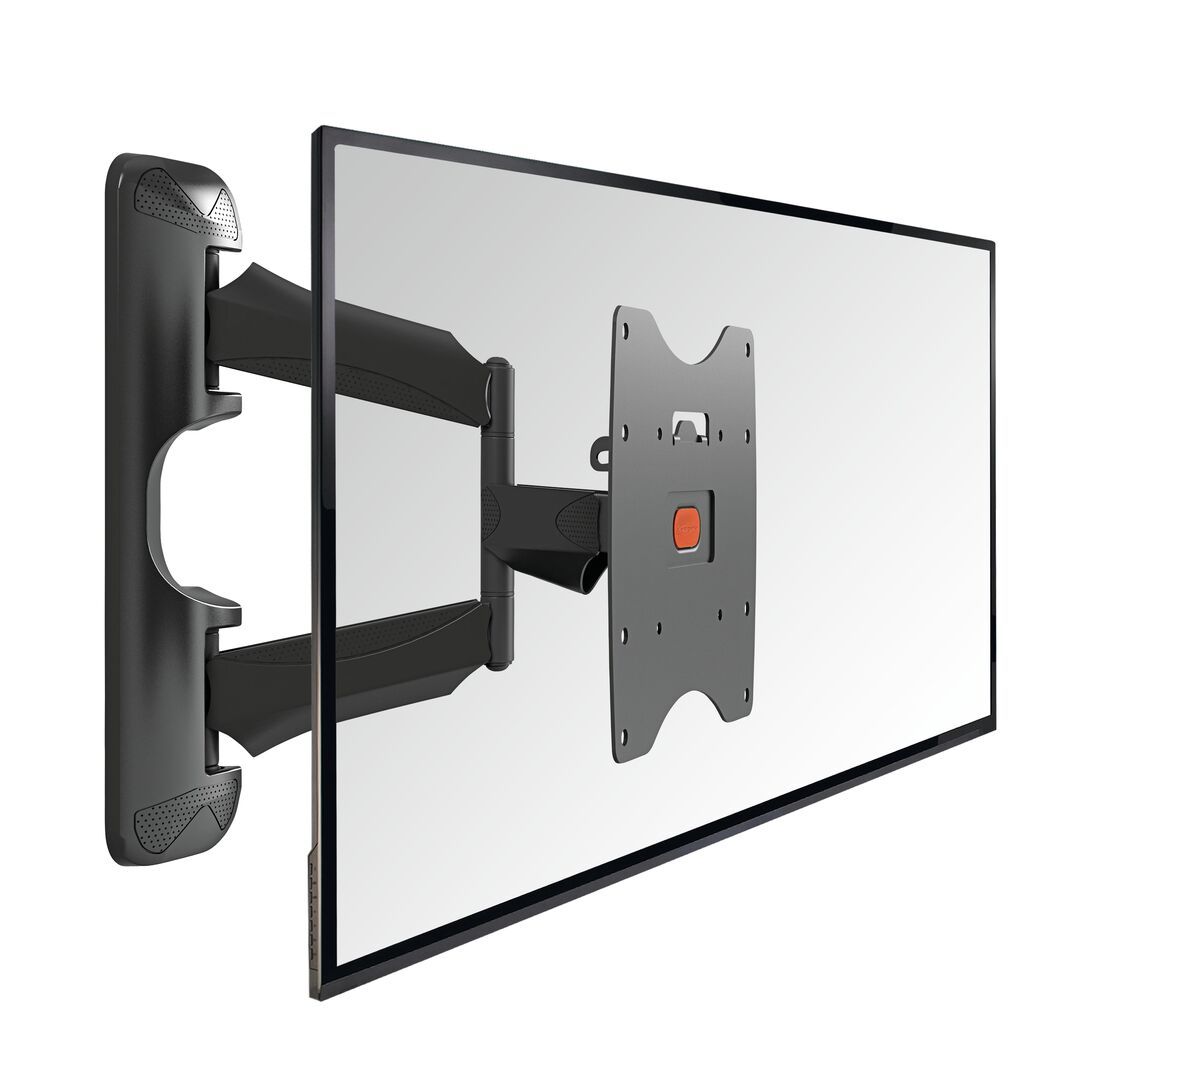 Vogel's BASE 45 S Full-Motion TV Wall Mount - Suitable for 19 up to 43 inch TVs - Full motion (up to 180°) - Tilt up to 15° - Product